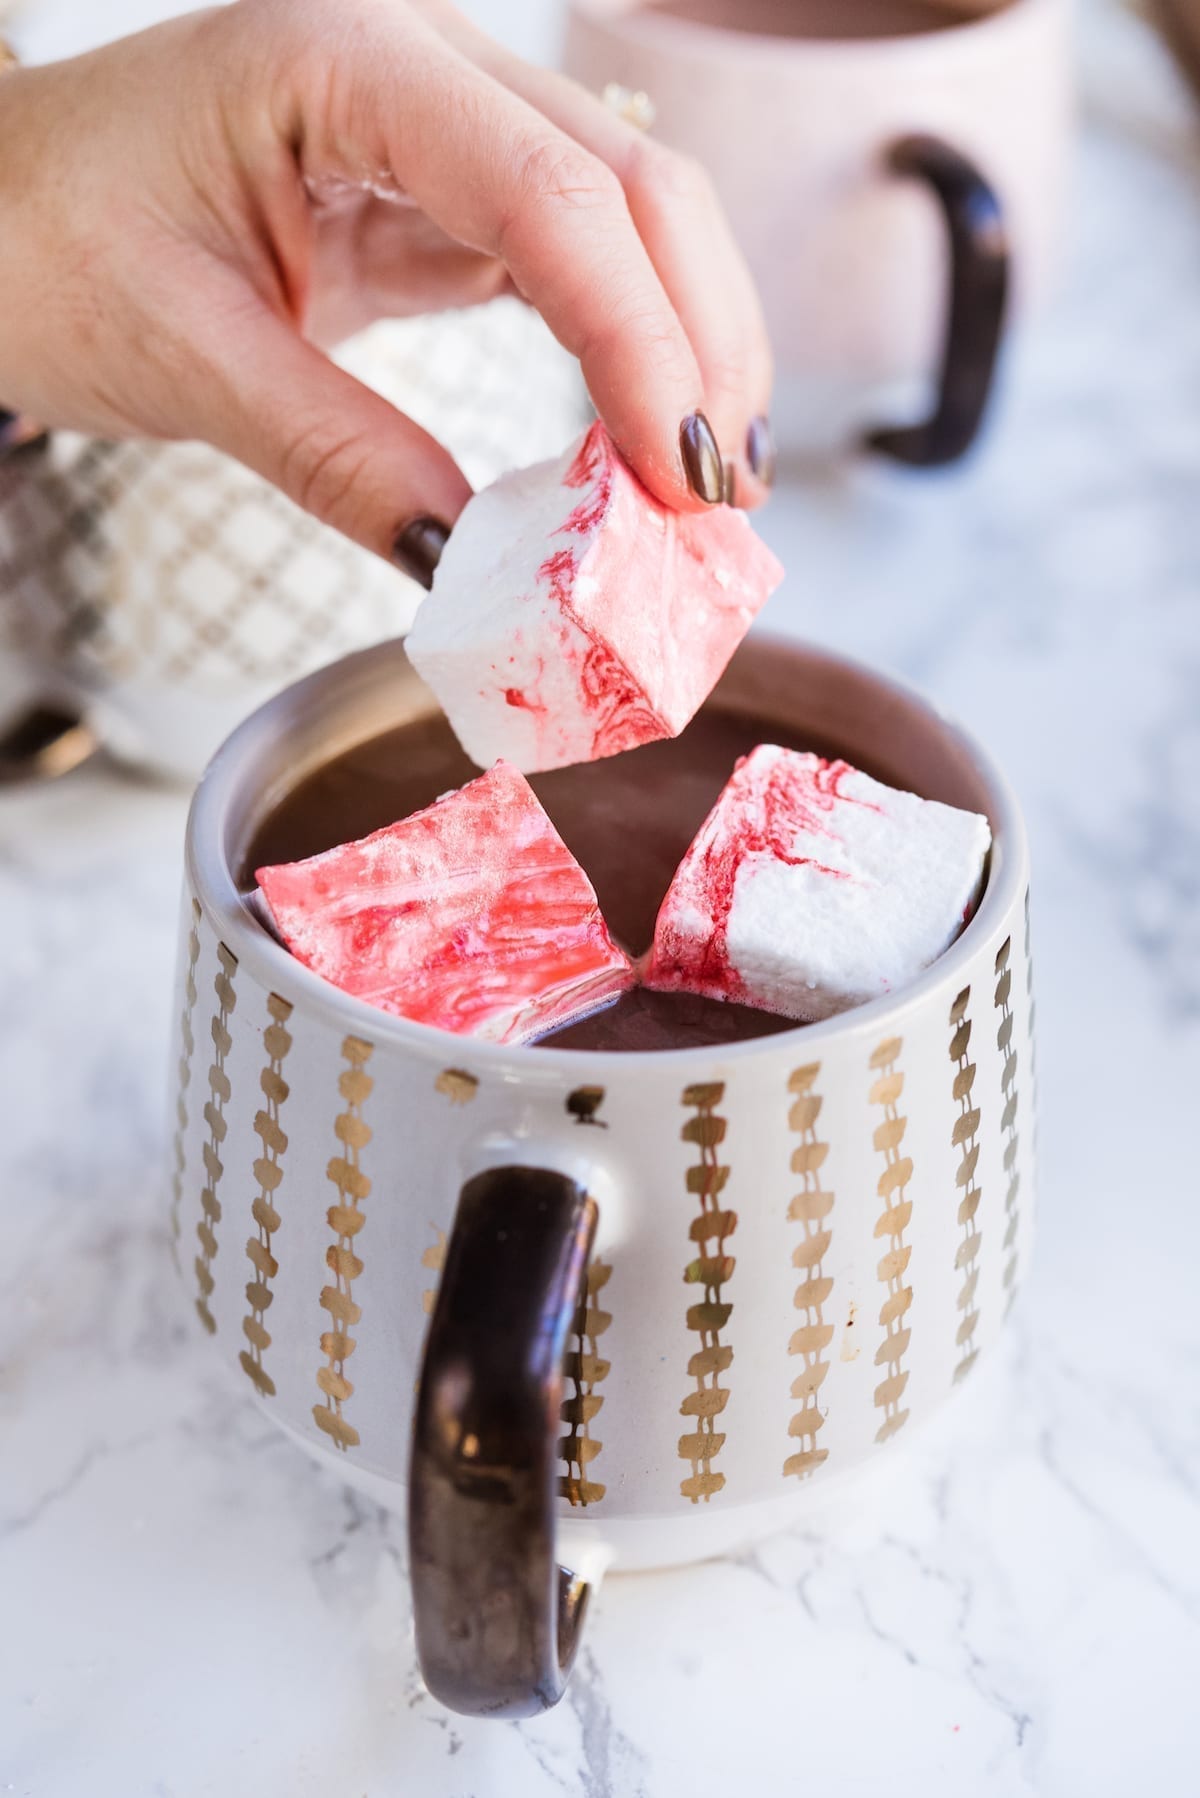 How to Make Homemade Marshmallows and a Peppermint Marshmallow Recipe | Christmas recipes, Christmas party ideas, entertaining tips and more from entertaining blog @cydconverse